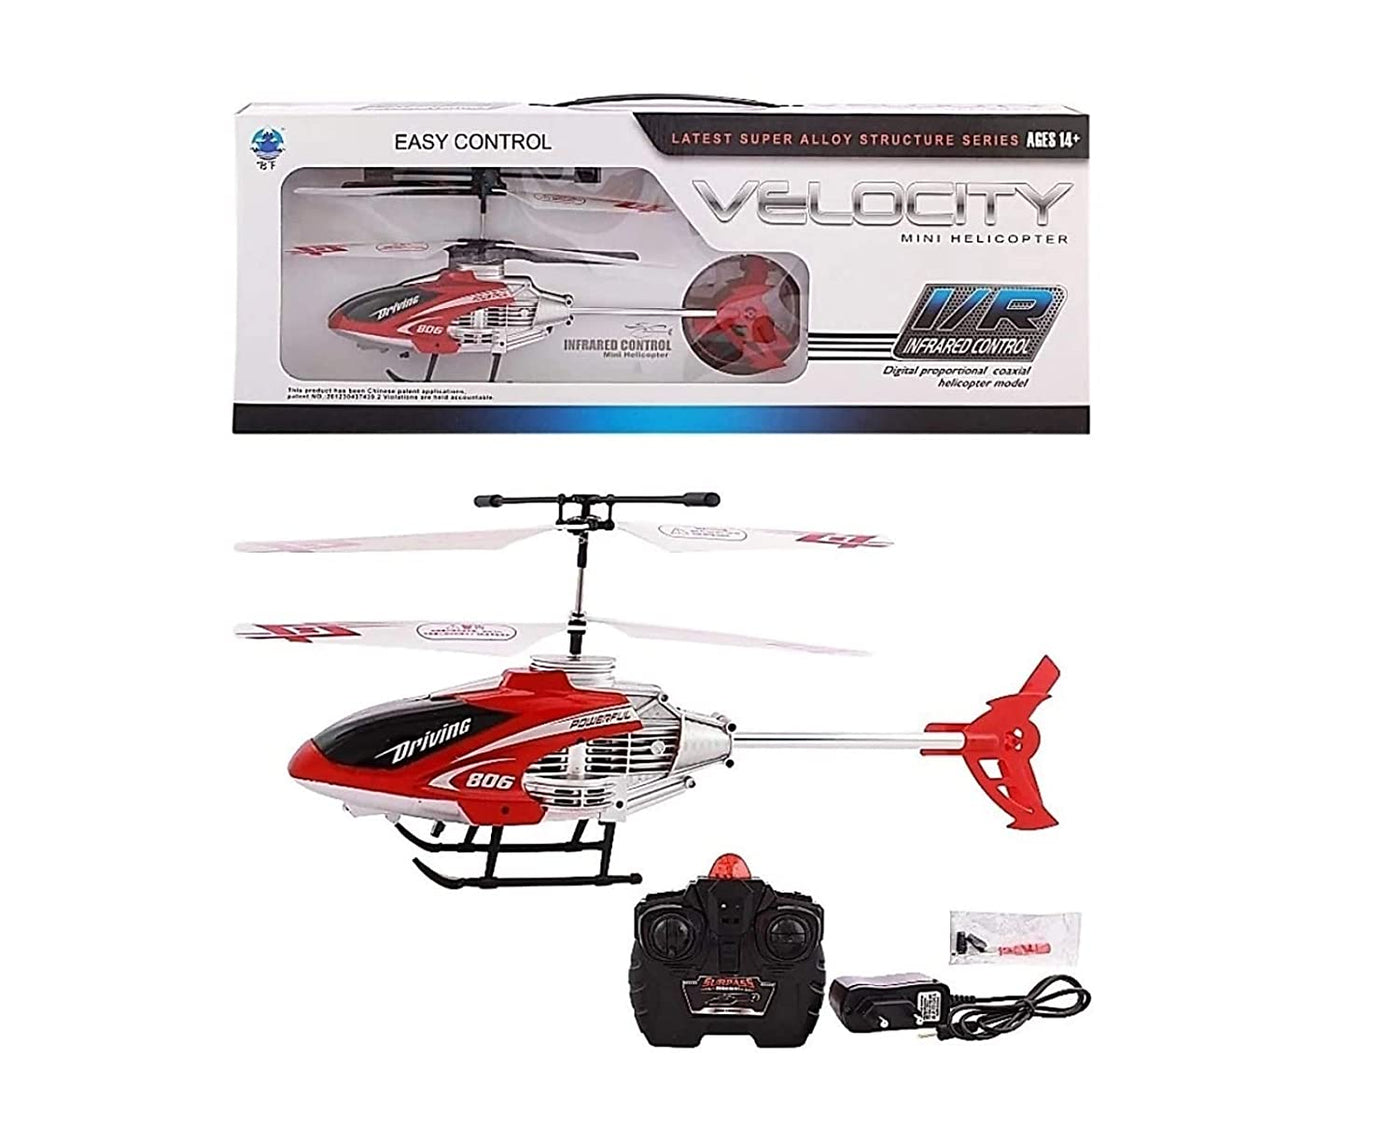 Remote Control Helicopter With Light